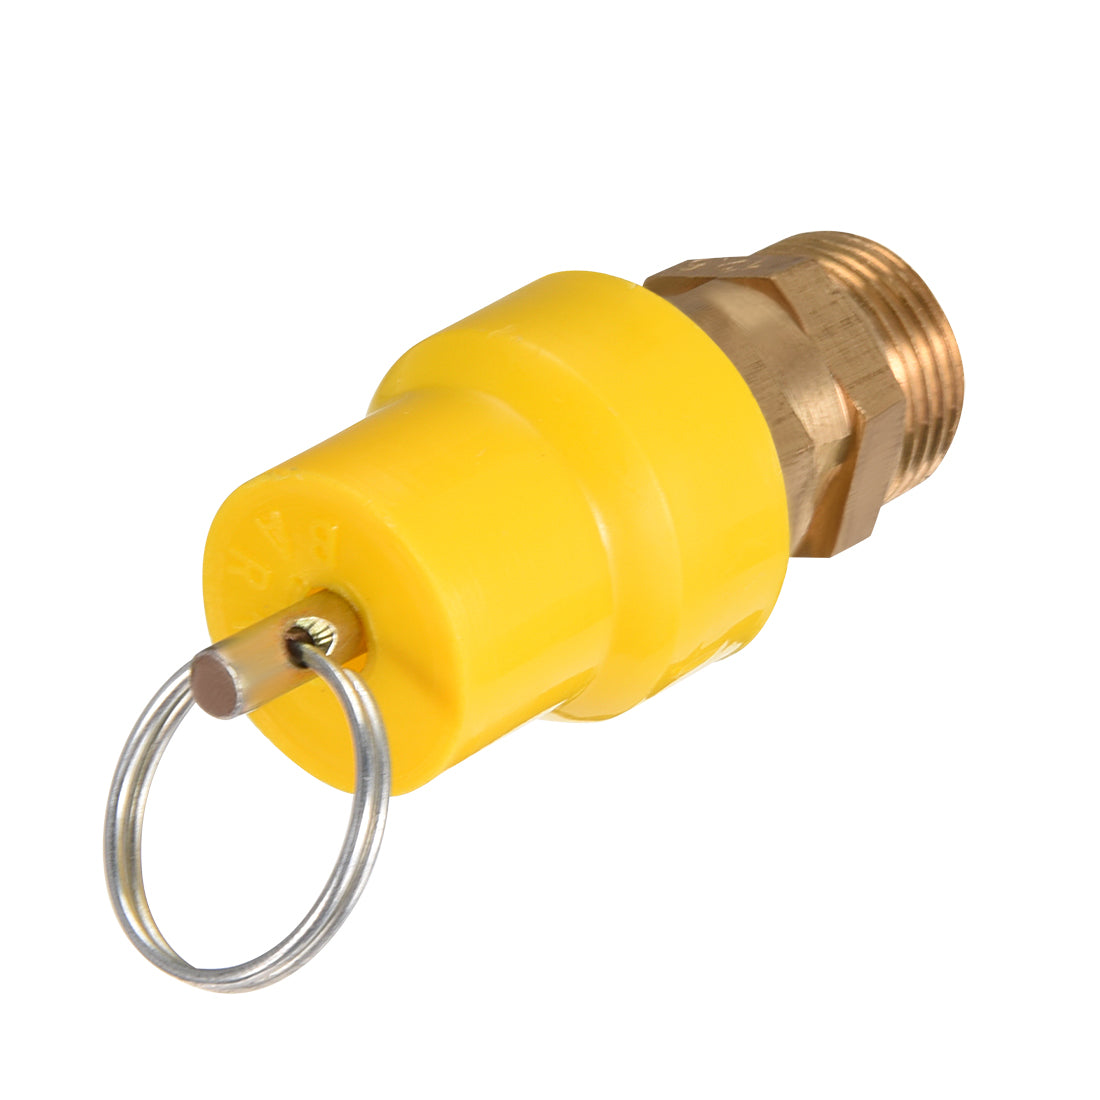 uxcell Uxcell Safety Valve Air Compressor Pressure Release Valve, G 3/8" Male, 1.22MPa Set Pressure, Yellow Hat, 1Pack